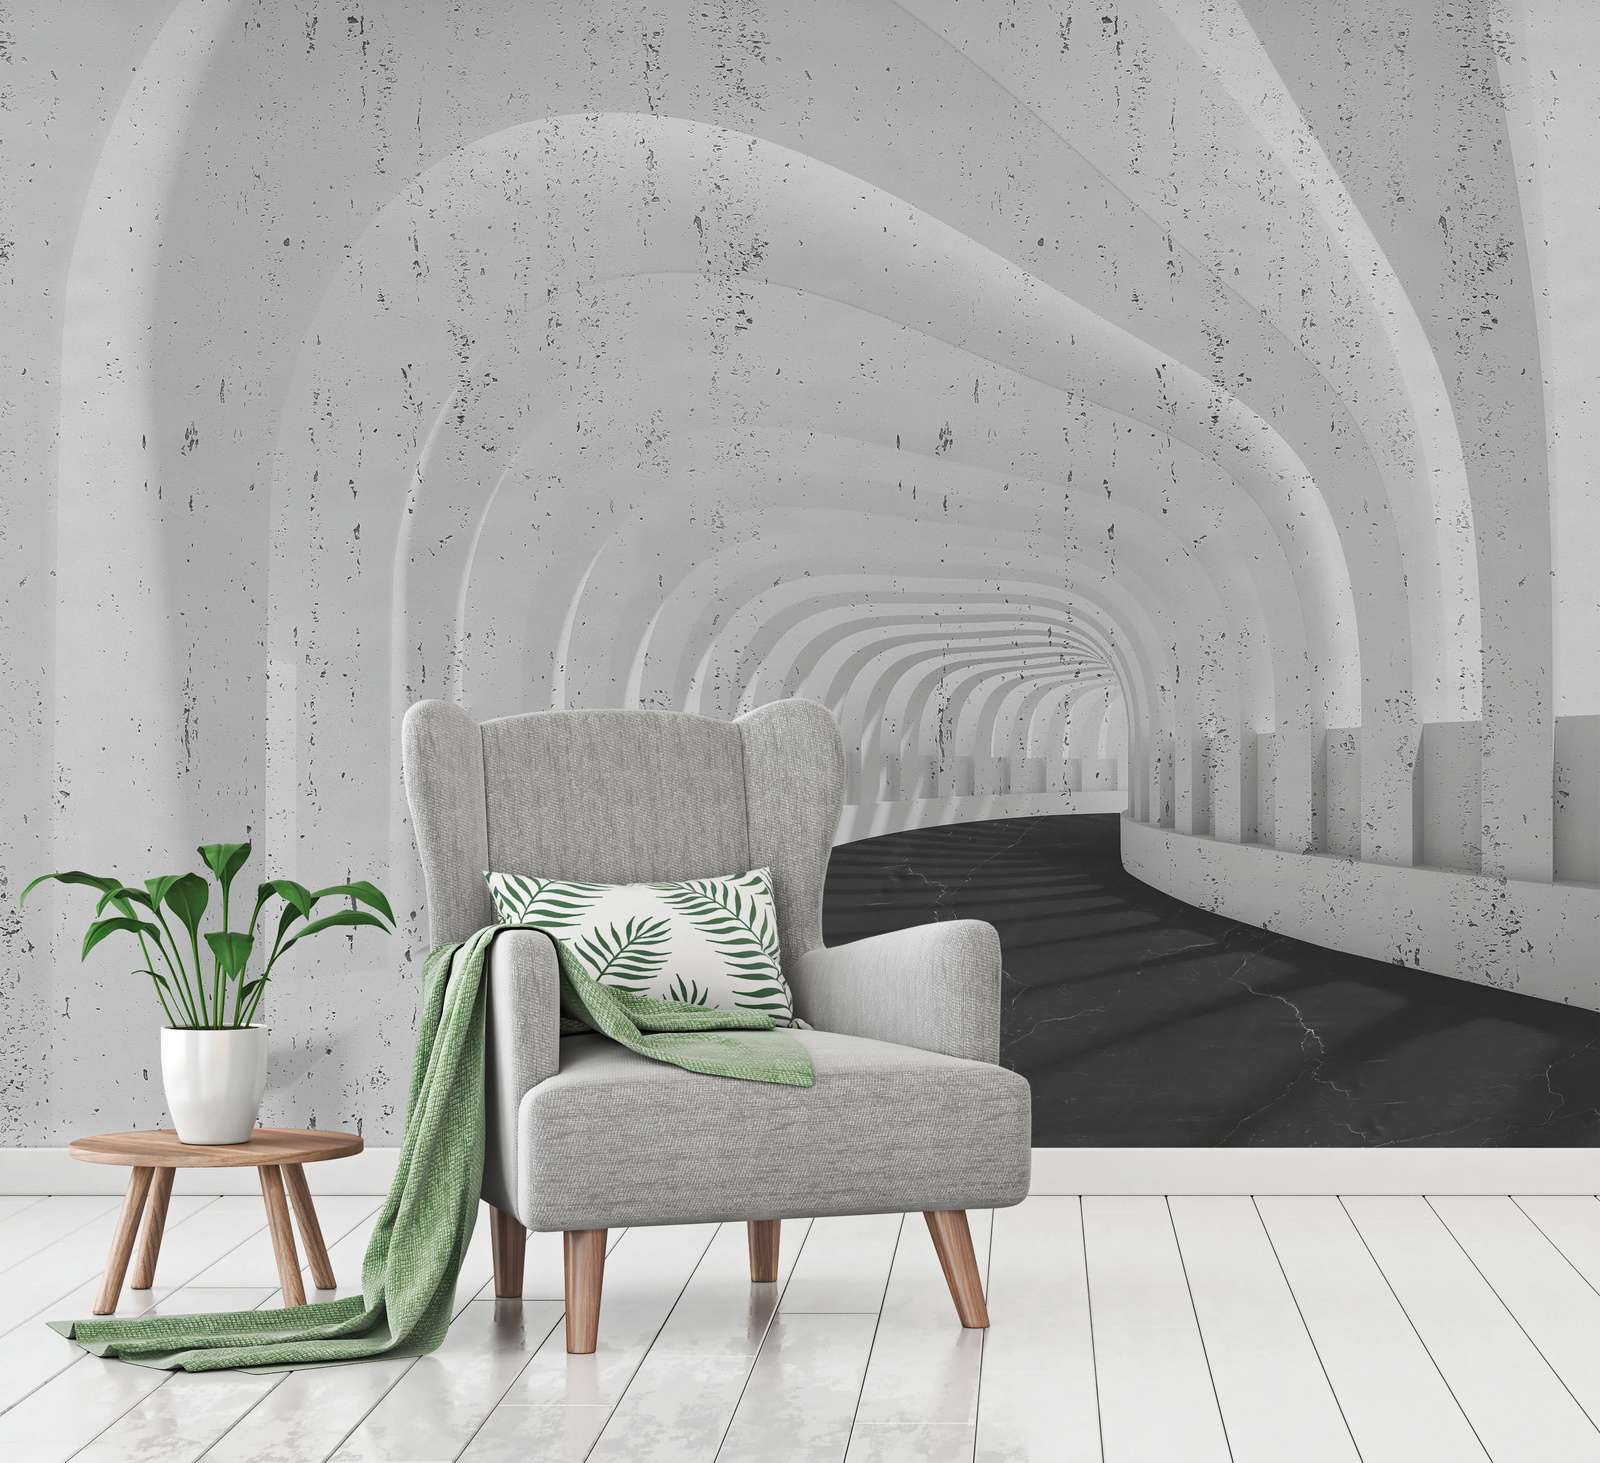             Photo wallpaper 3D Concrete tunnel with arches - Grey, Black
        